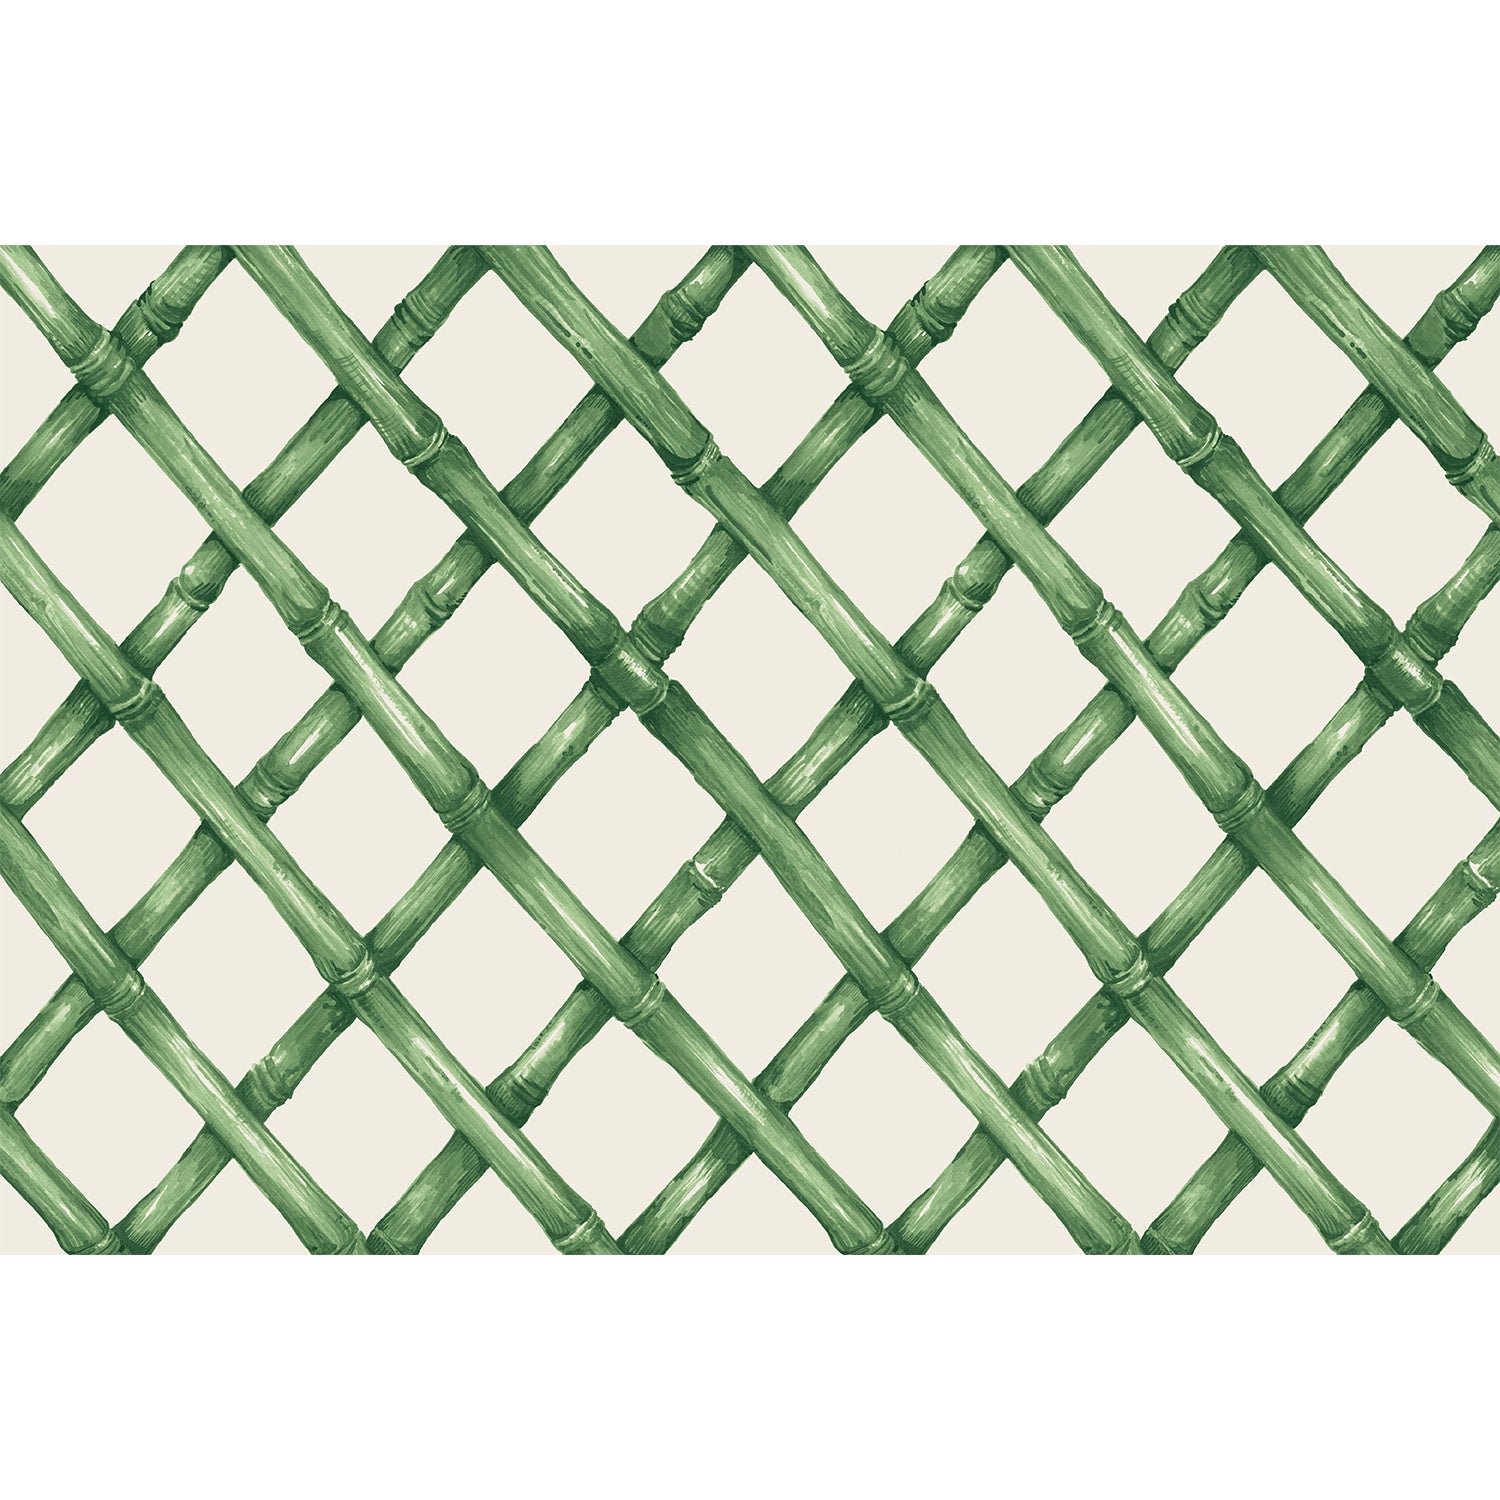 A Green Lattice Placemat by Hester &amp; Cook on a white background.